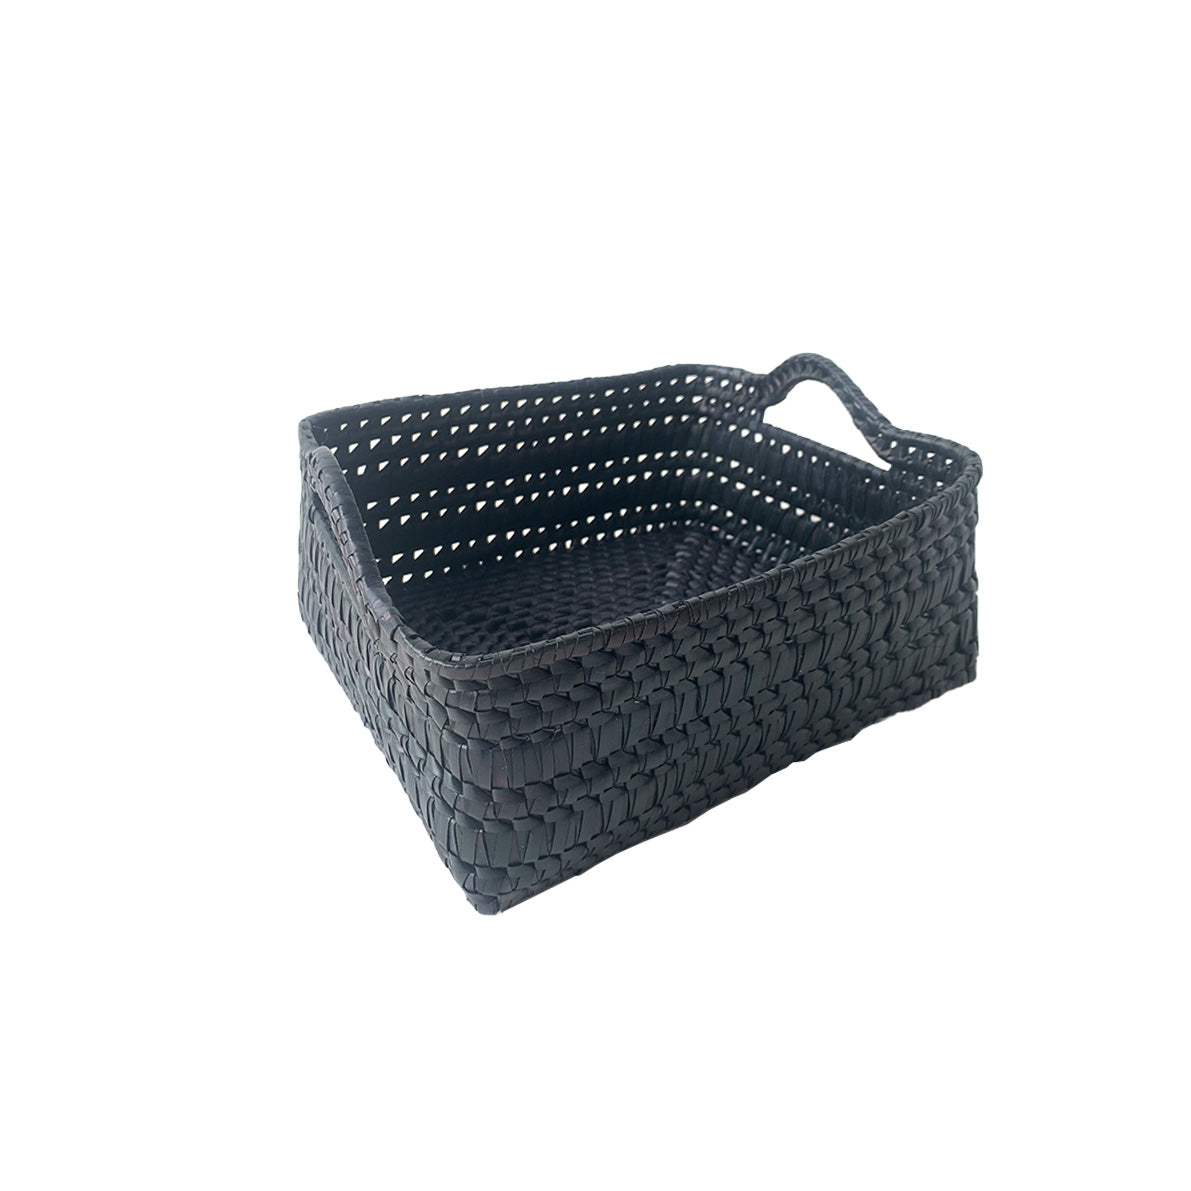 Handcrafted Rectangular Storage Basket with Handles Small - Black